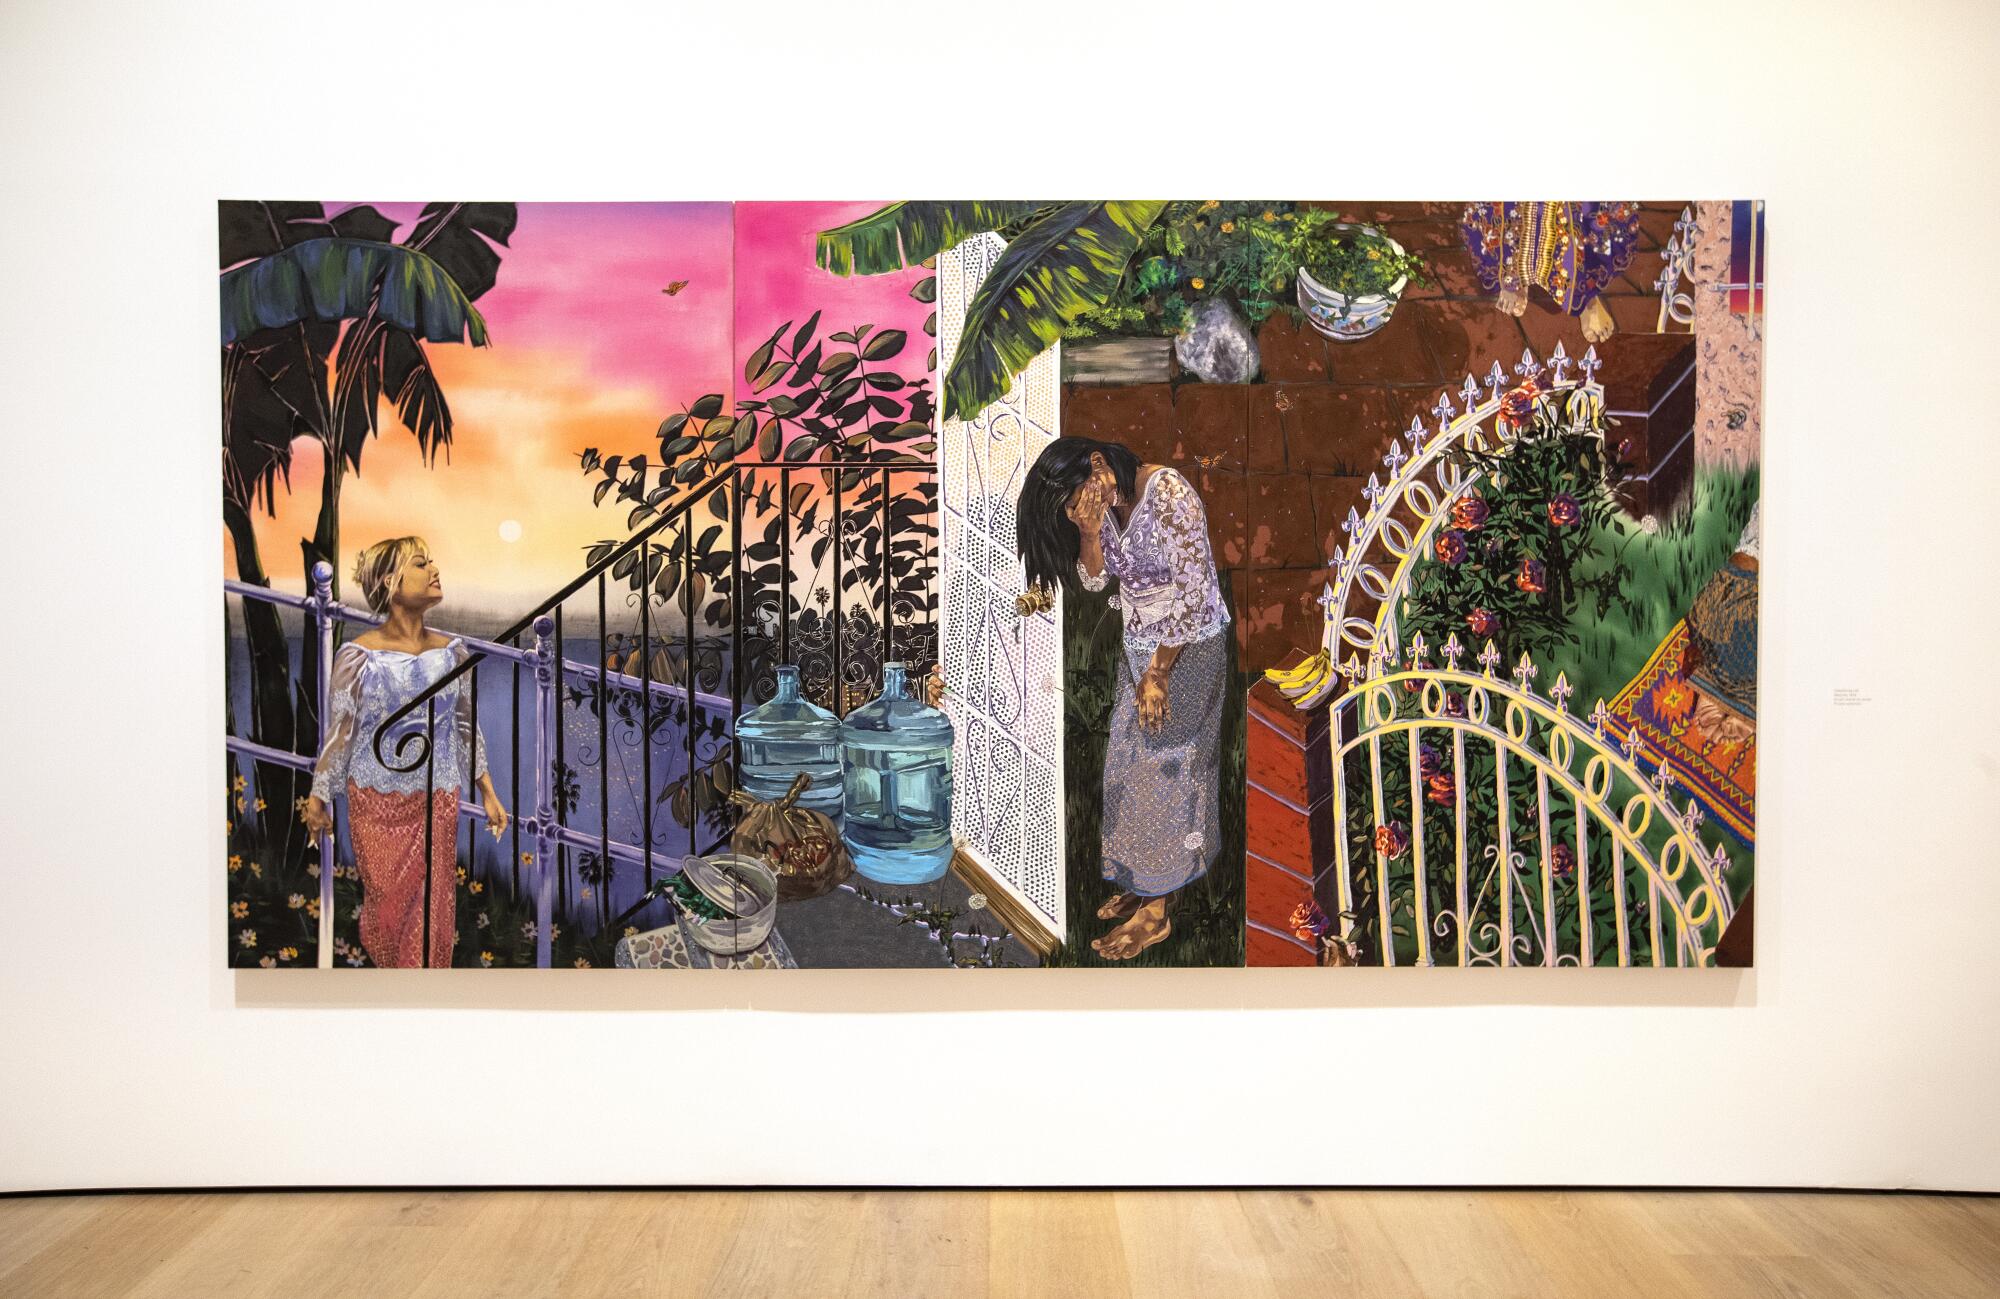 A painting that shows two Cambodian women in a garden (a composite of various gardens) hands on a wall in a gallery.